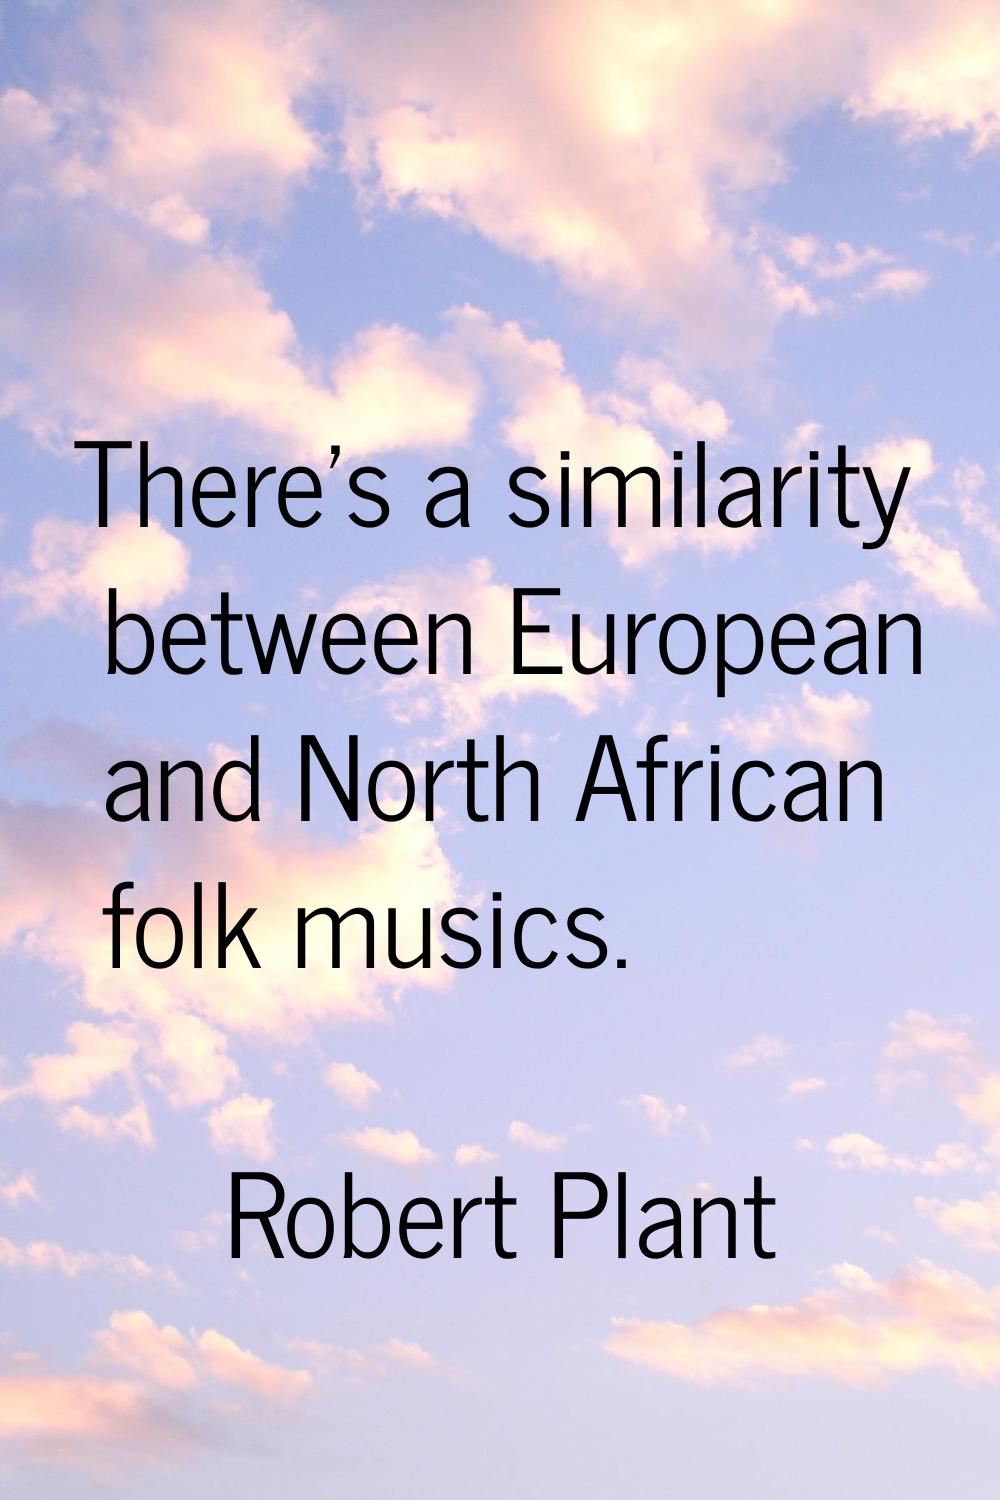 There's a similarity between European and North African folk musics.